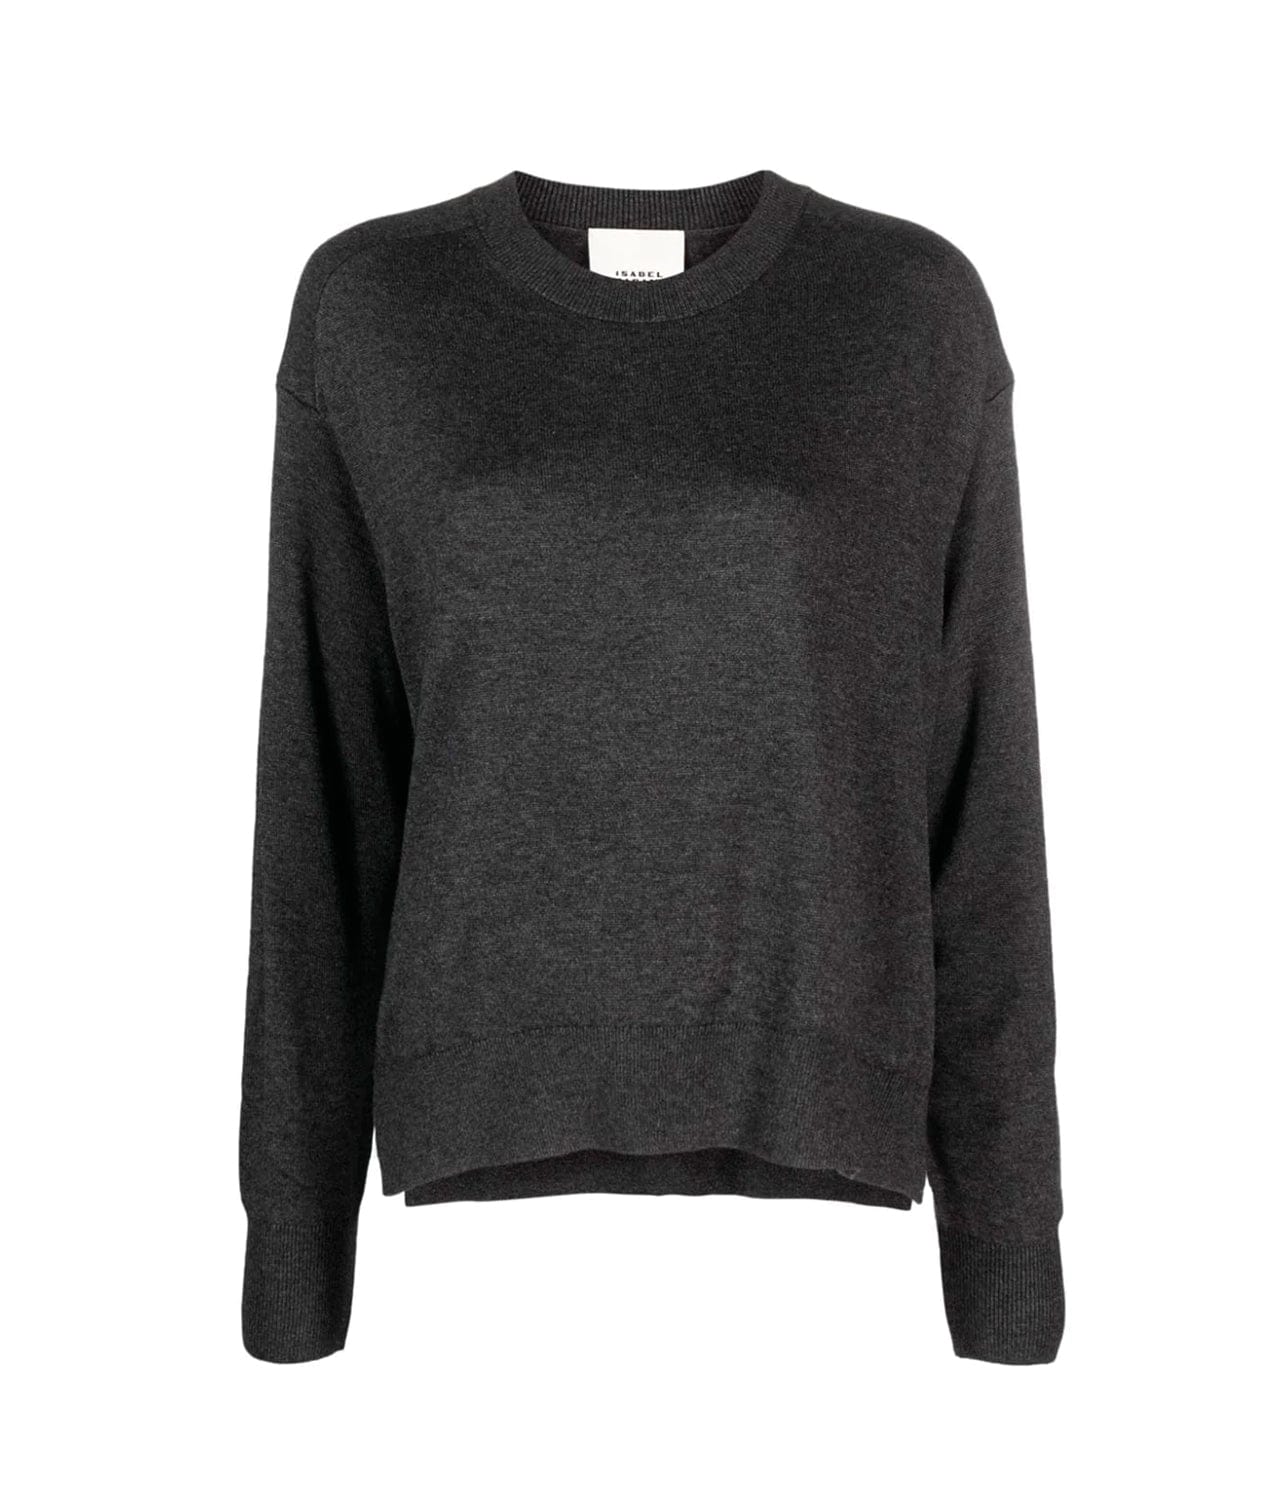 GIULIANA PULLOVER- ANTHRACITE | ISABEL MARANT |  ISABEL MARANT GIULIANA PULLOVER- ANTHRACITE